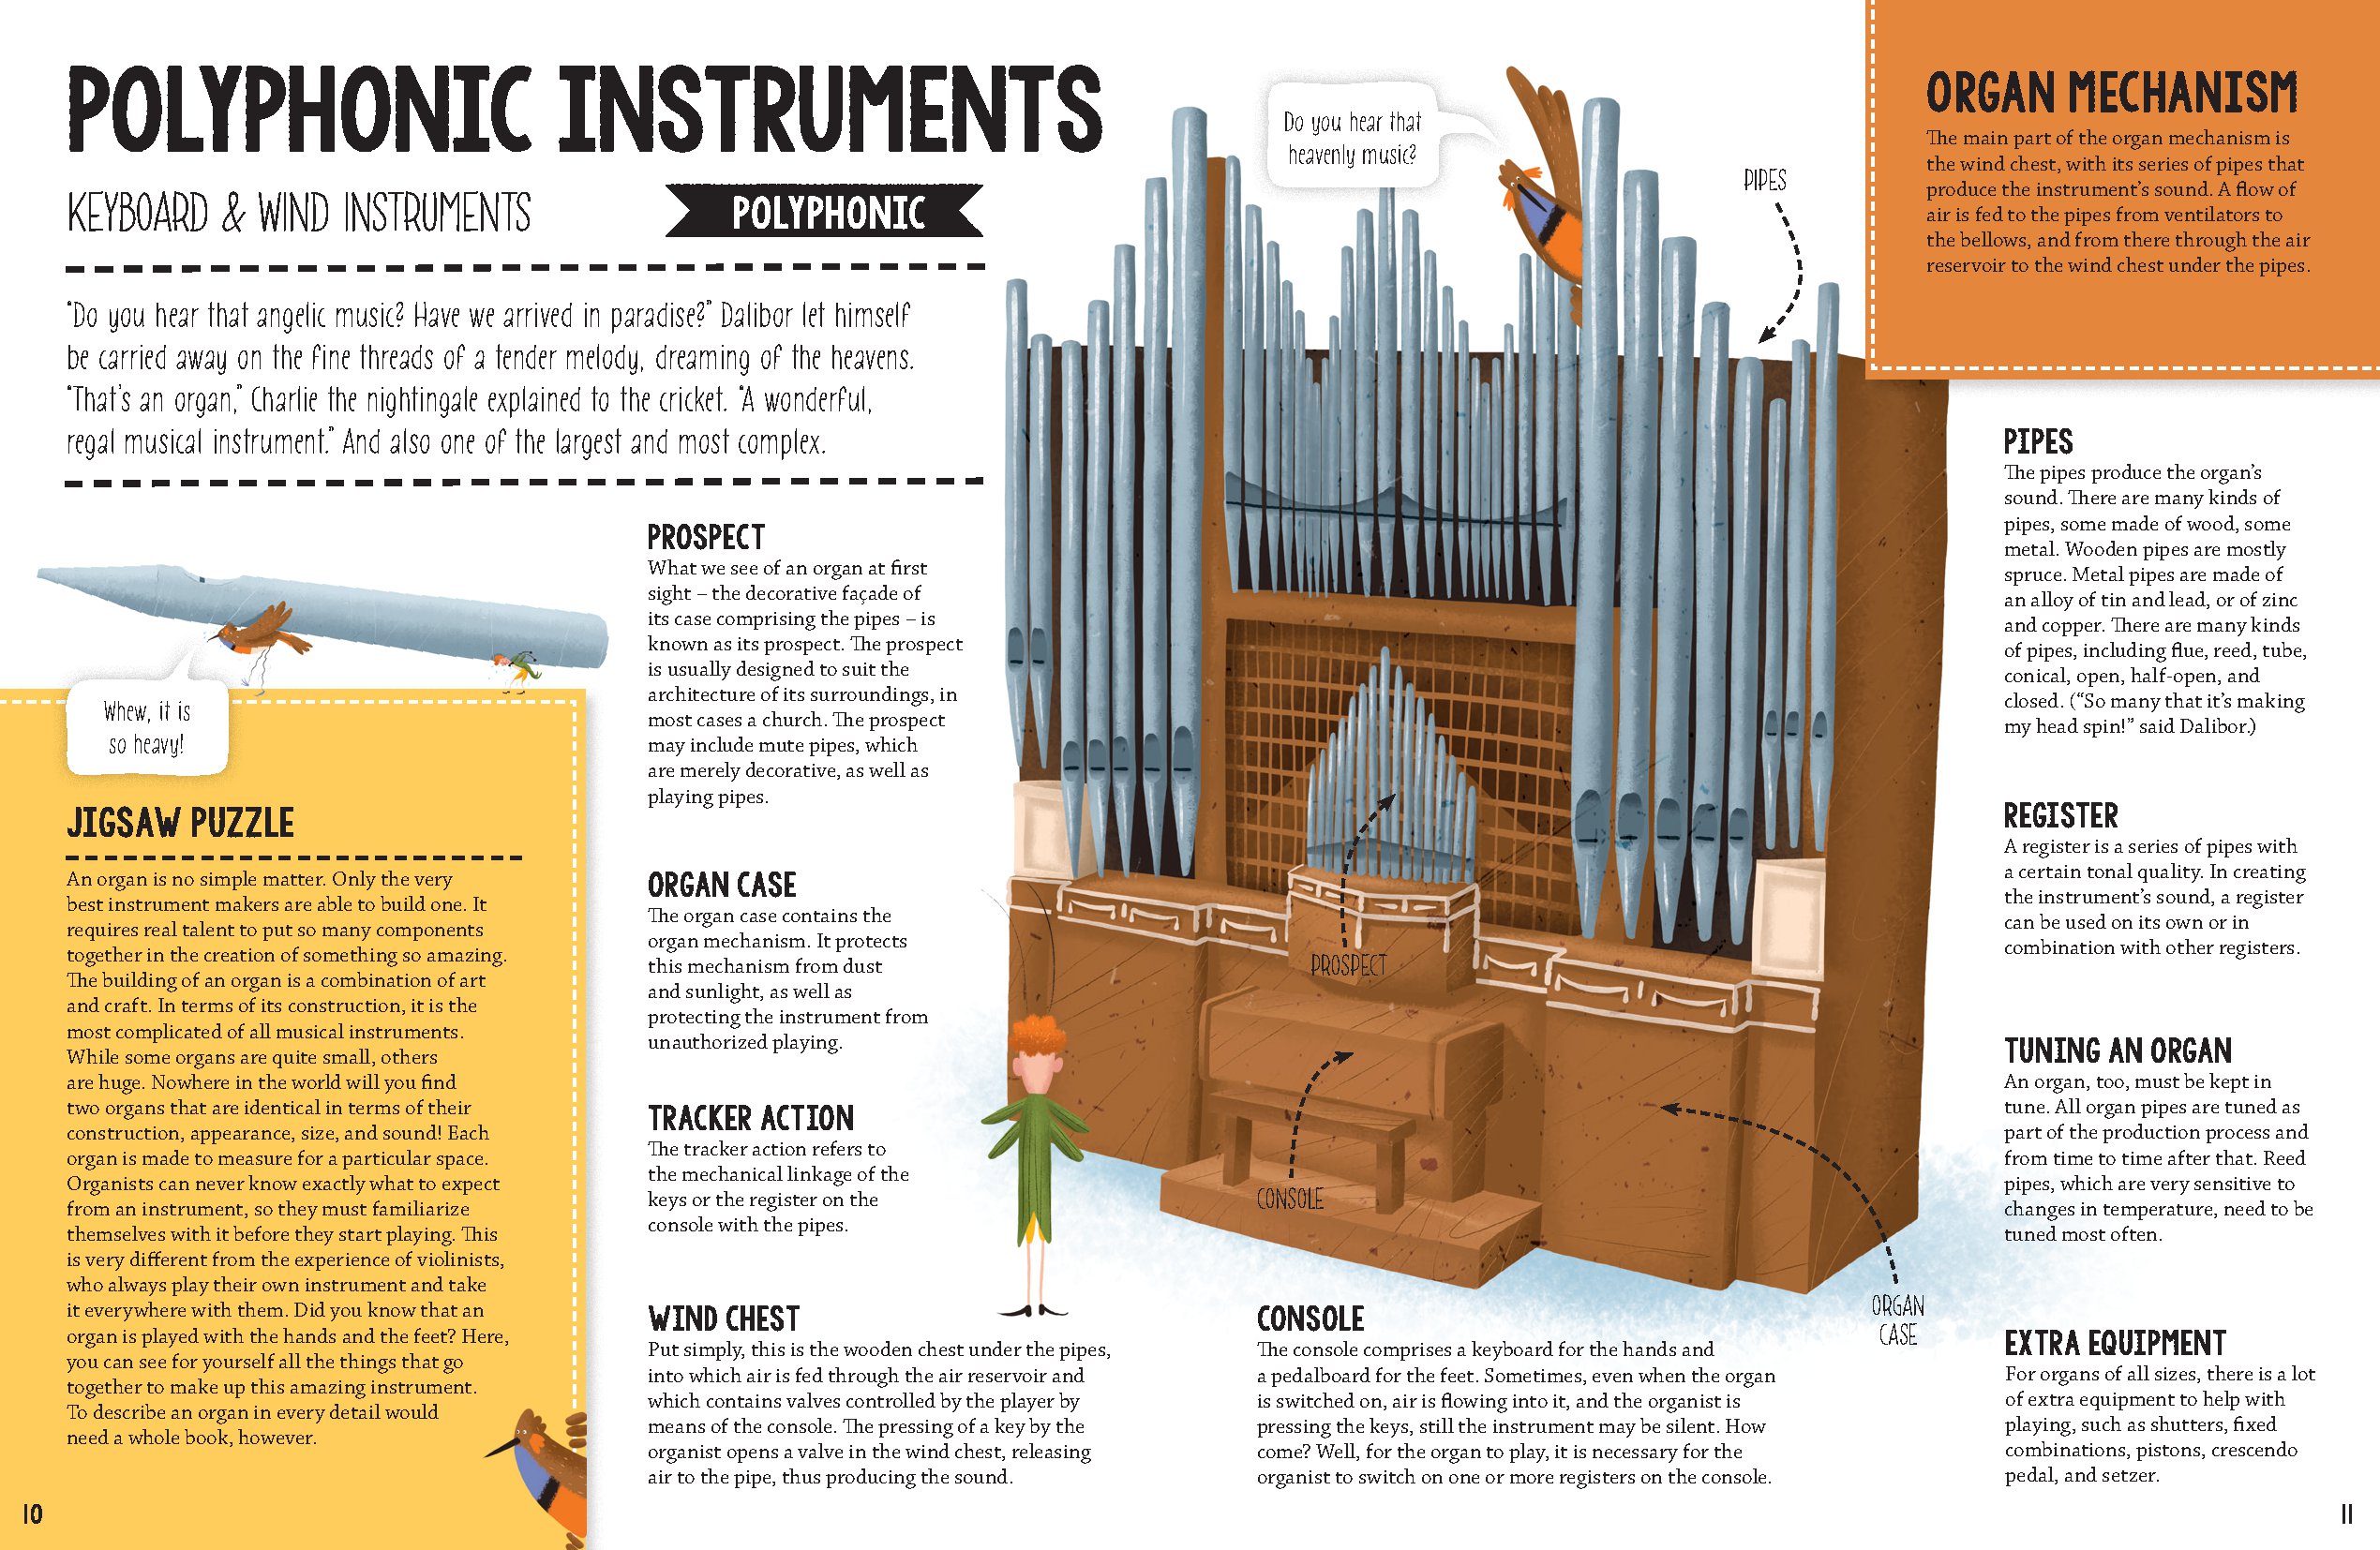 The Stories of Musical Instruments